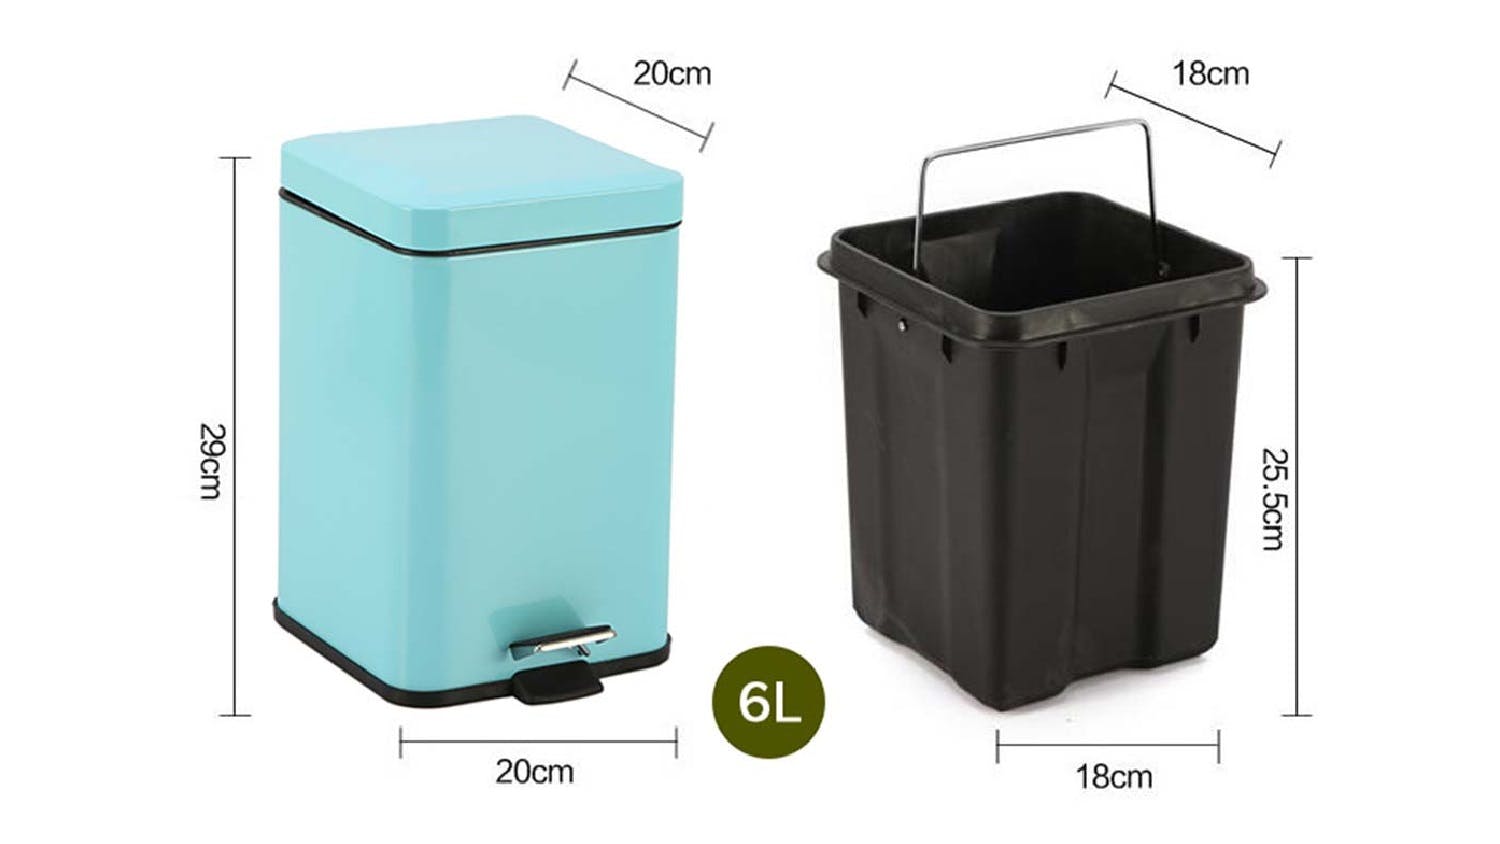 SOGA Stainless Steel Square Rubbish Bin w/ Pedal 6L - Blue